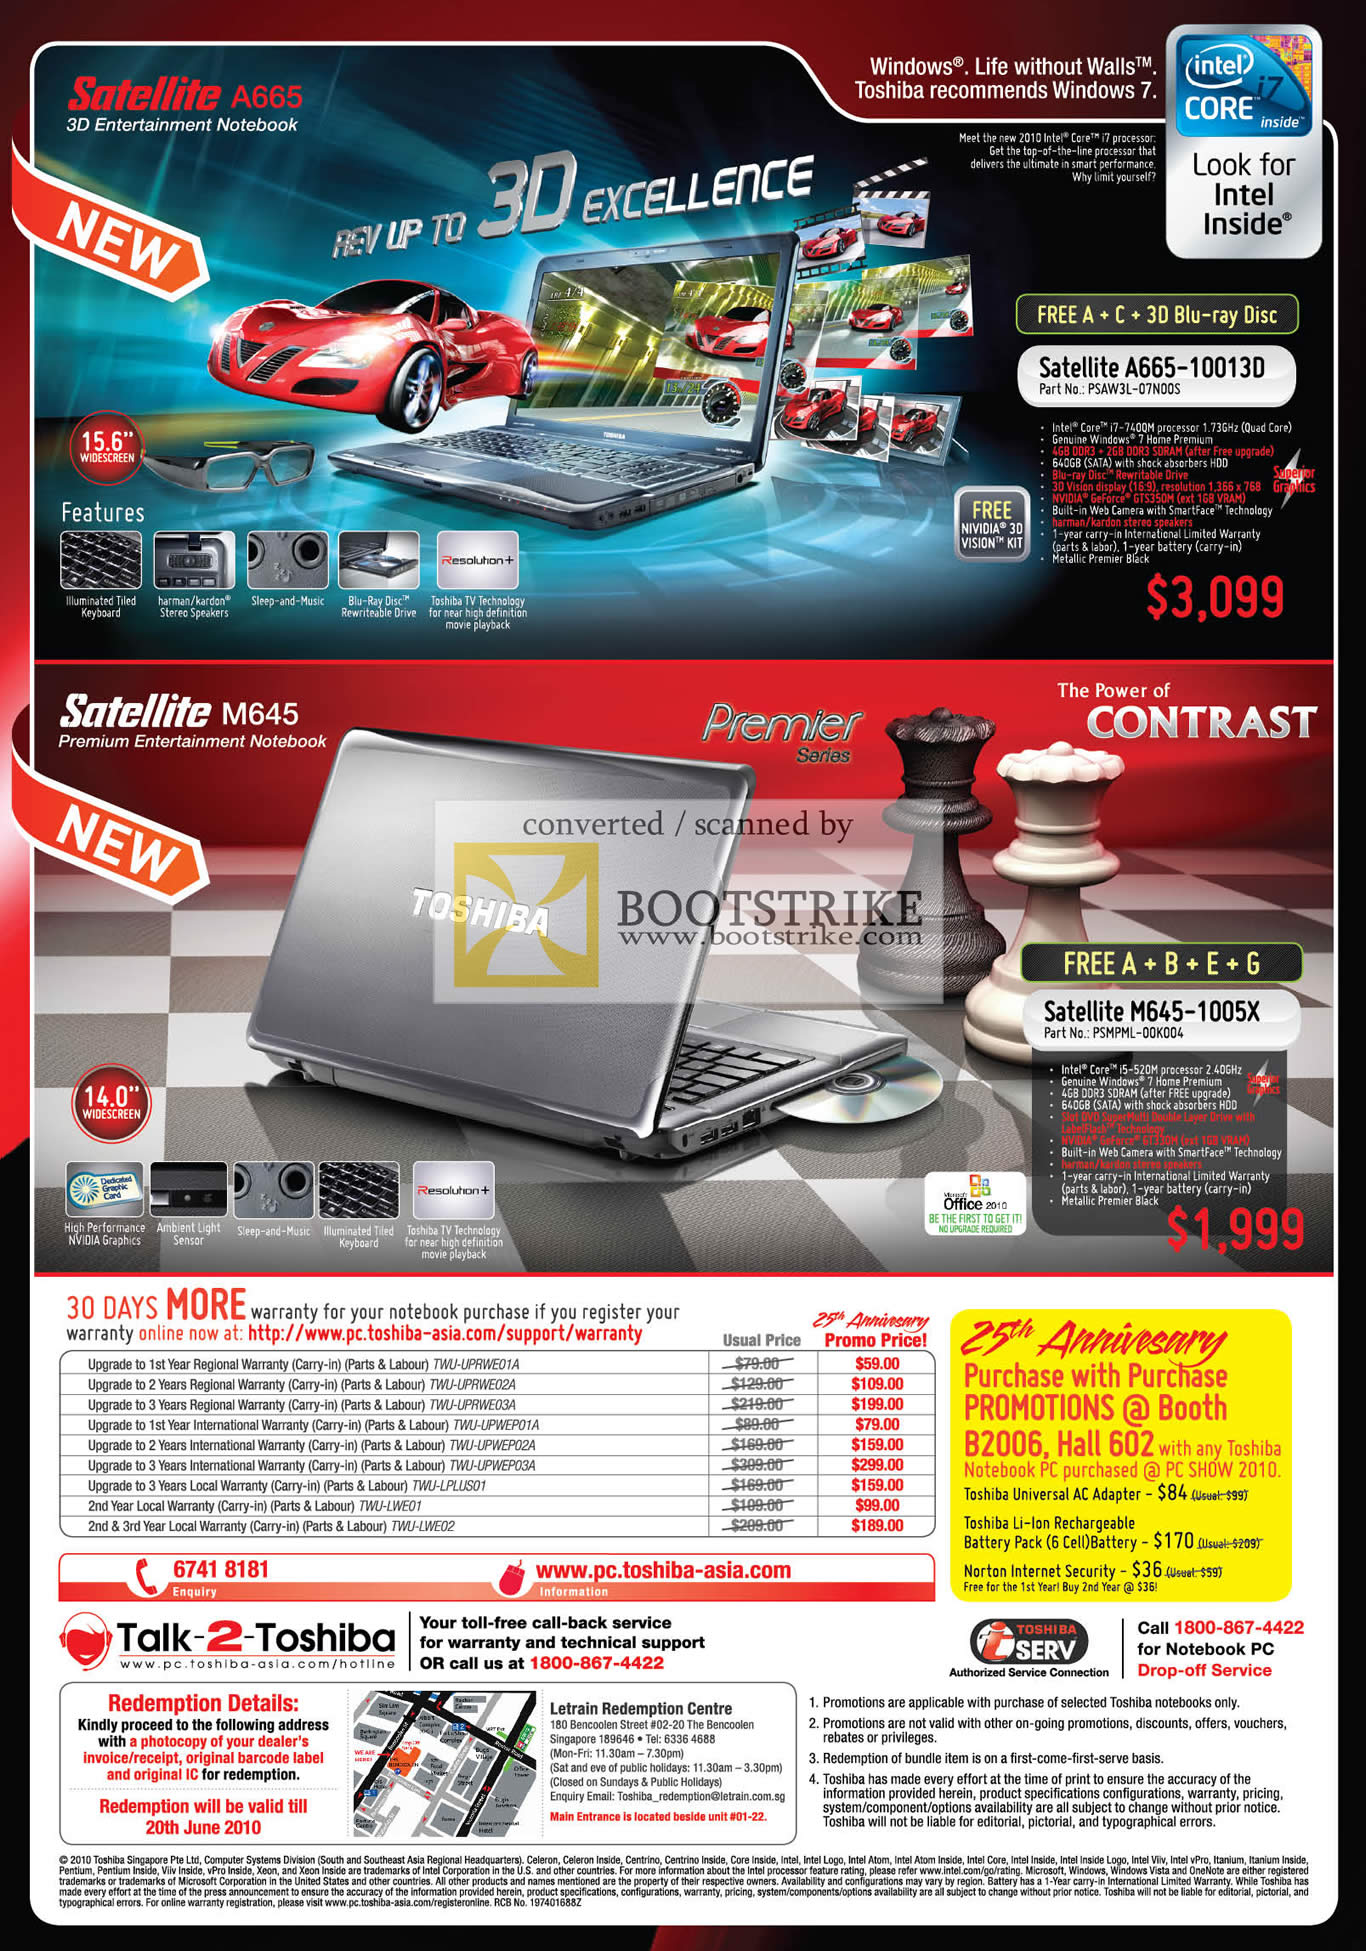 PC Show 2010 price list image brochure of Toshiba Notebooks Satellite A665 10013D M645 1005X Warranty Upgrades